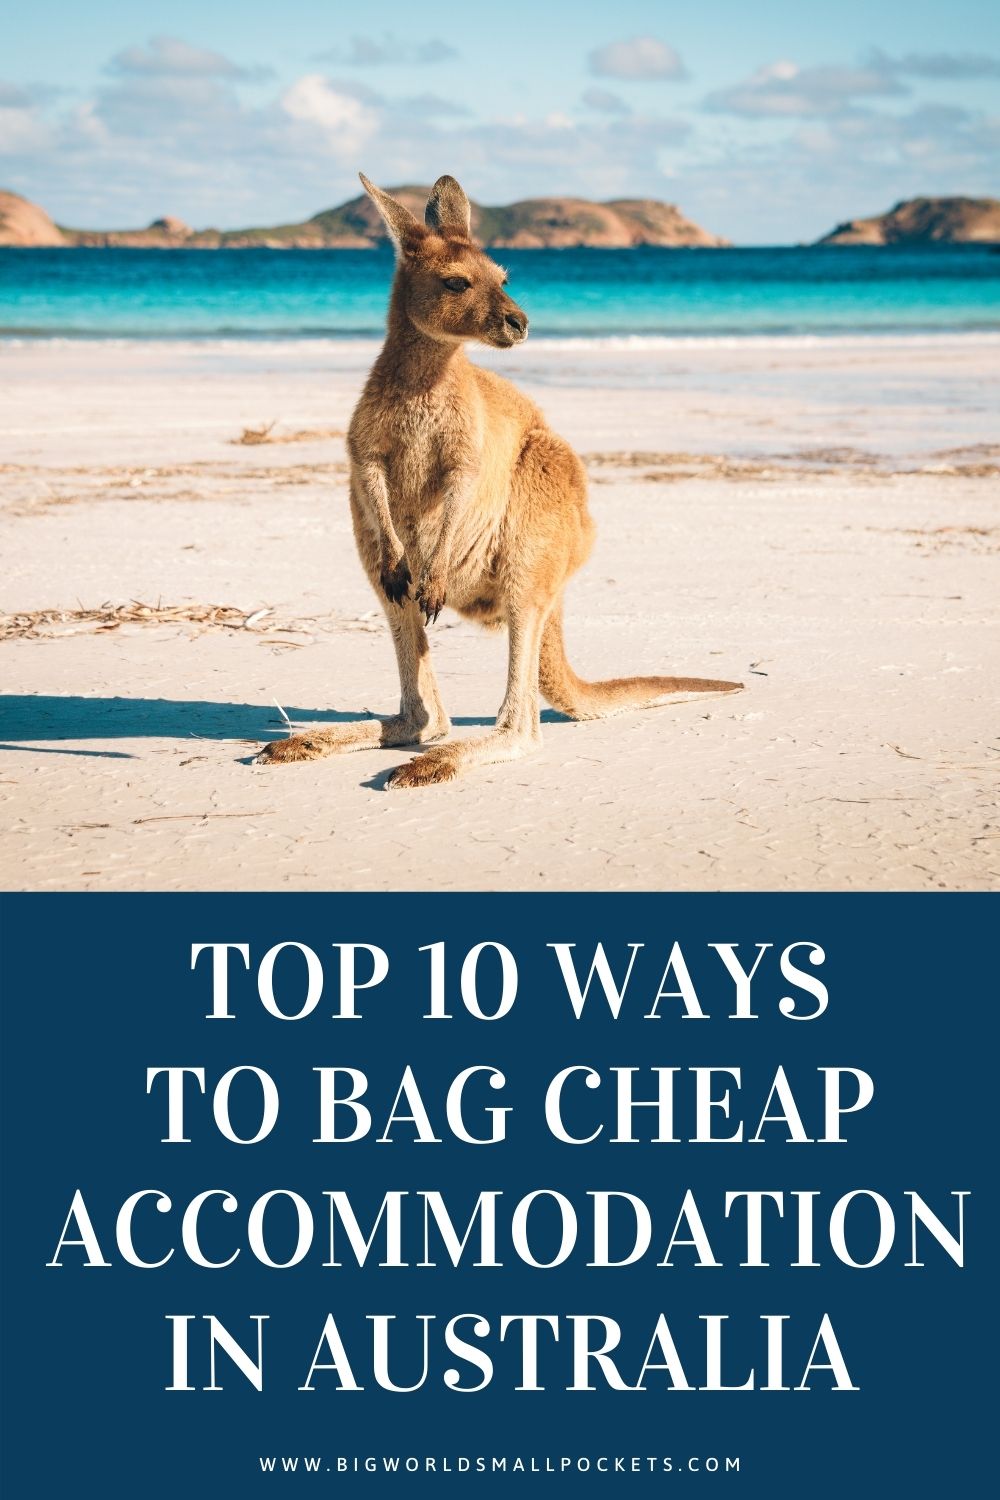 Top 10 Ways to Bag Cheap Accommodation in Australia